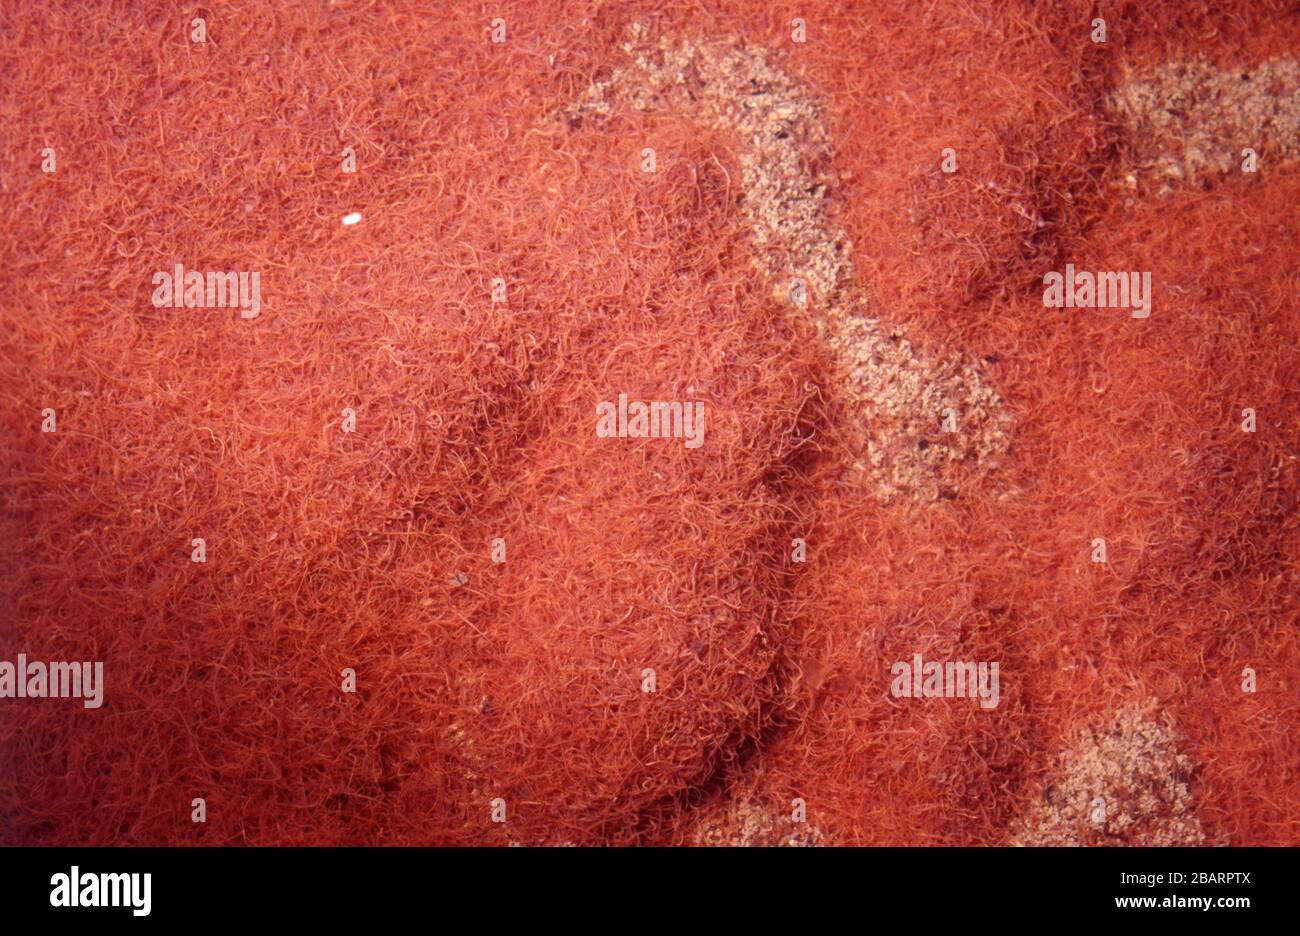 Tubifex worms for fish food Stock Photo